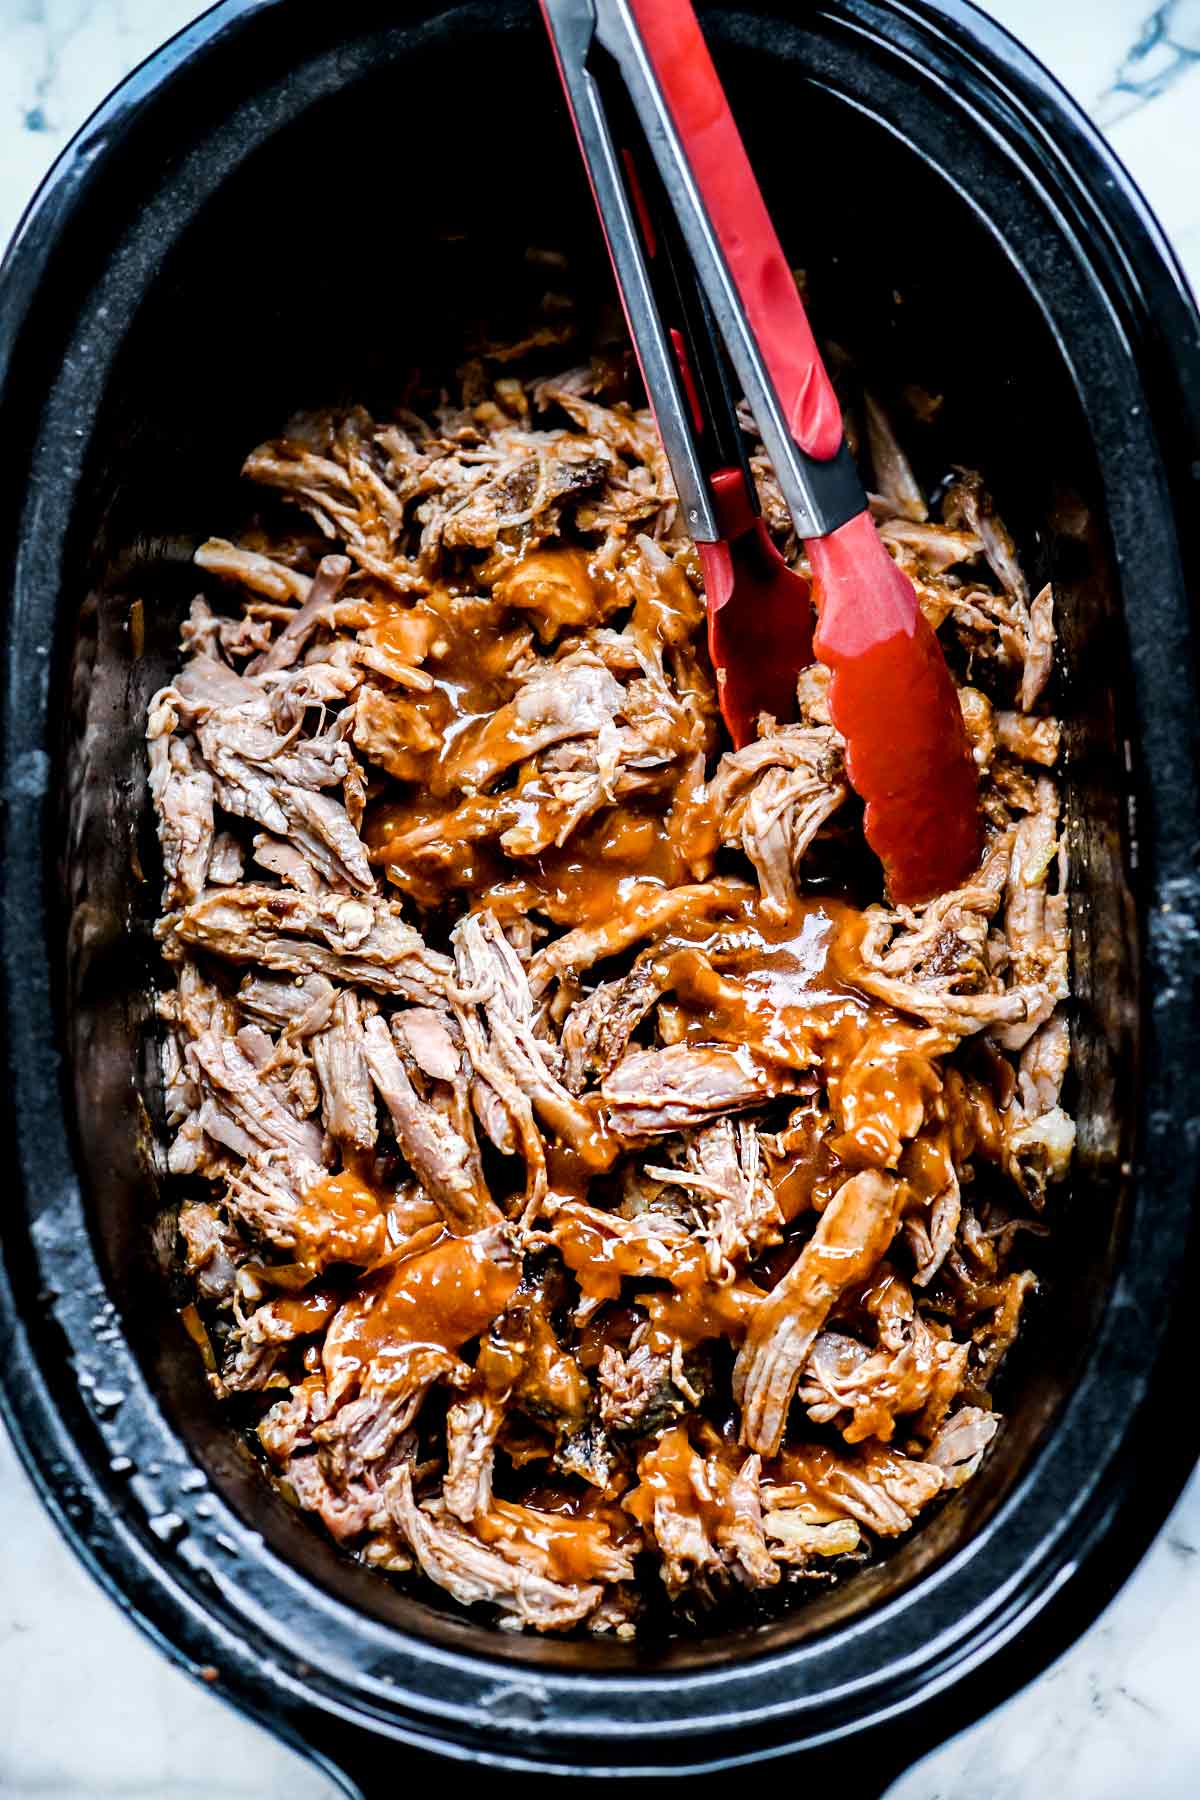 Slow Cooker Pulled Pork Foodiecrush.com 020 